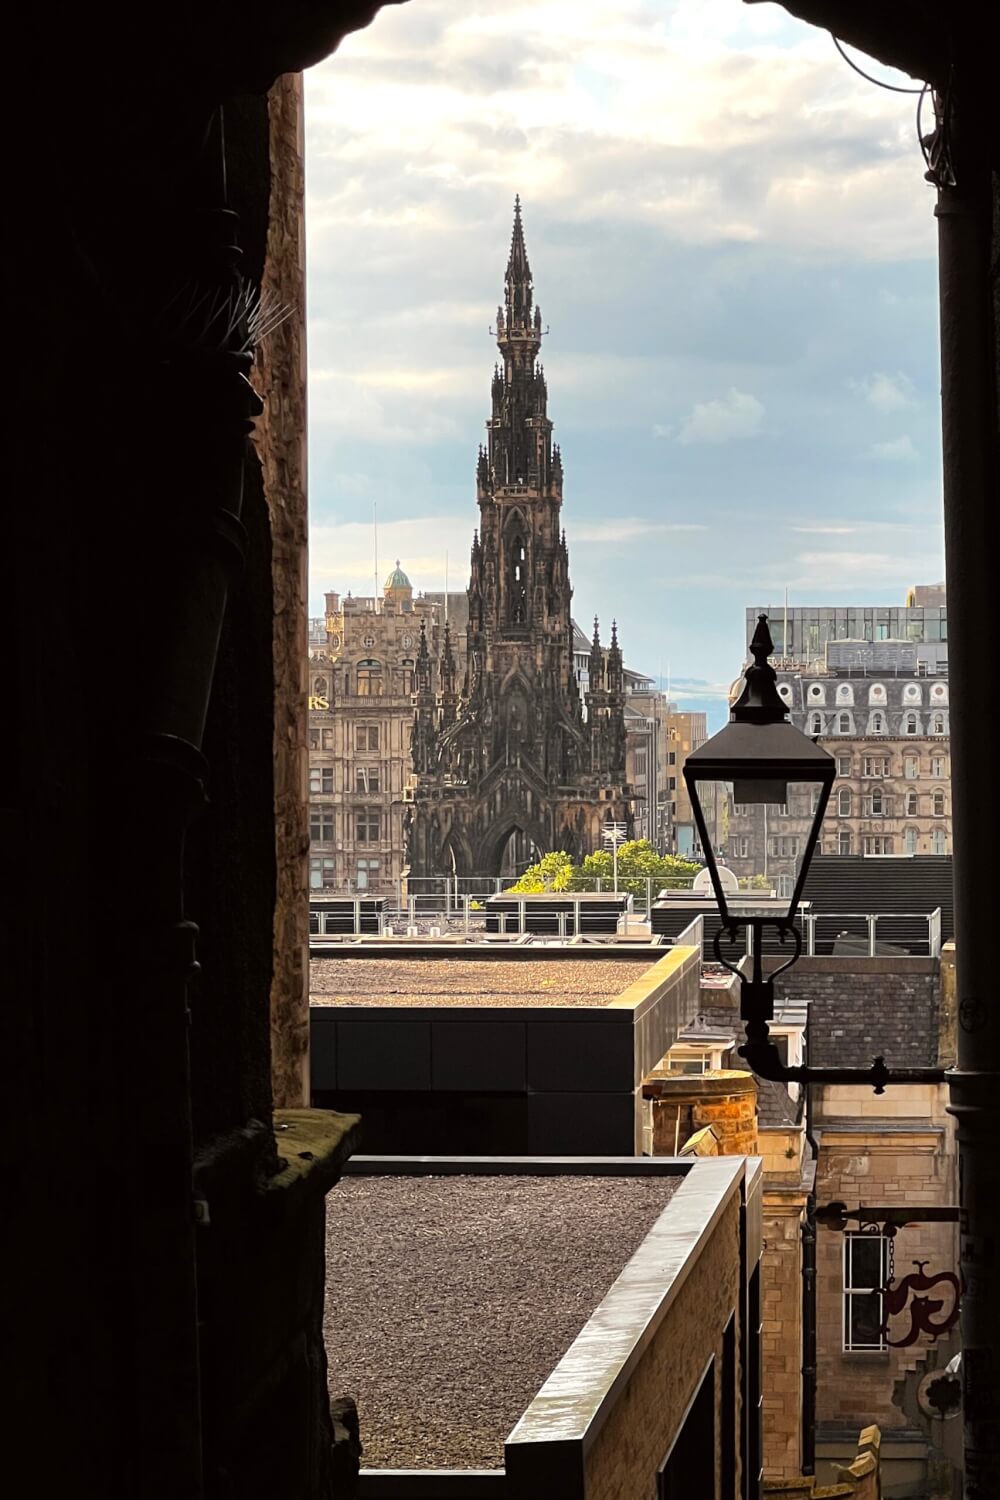 places you must visit in edinburgh